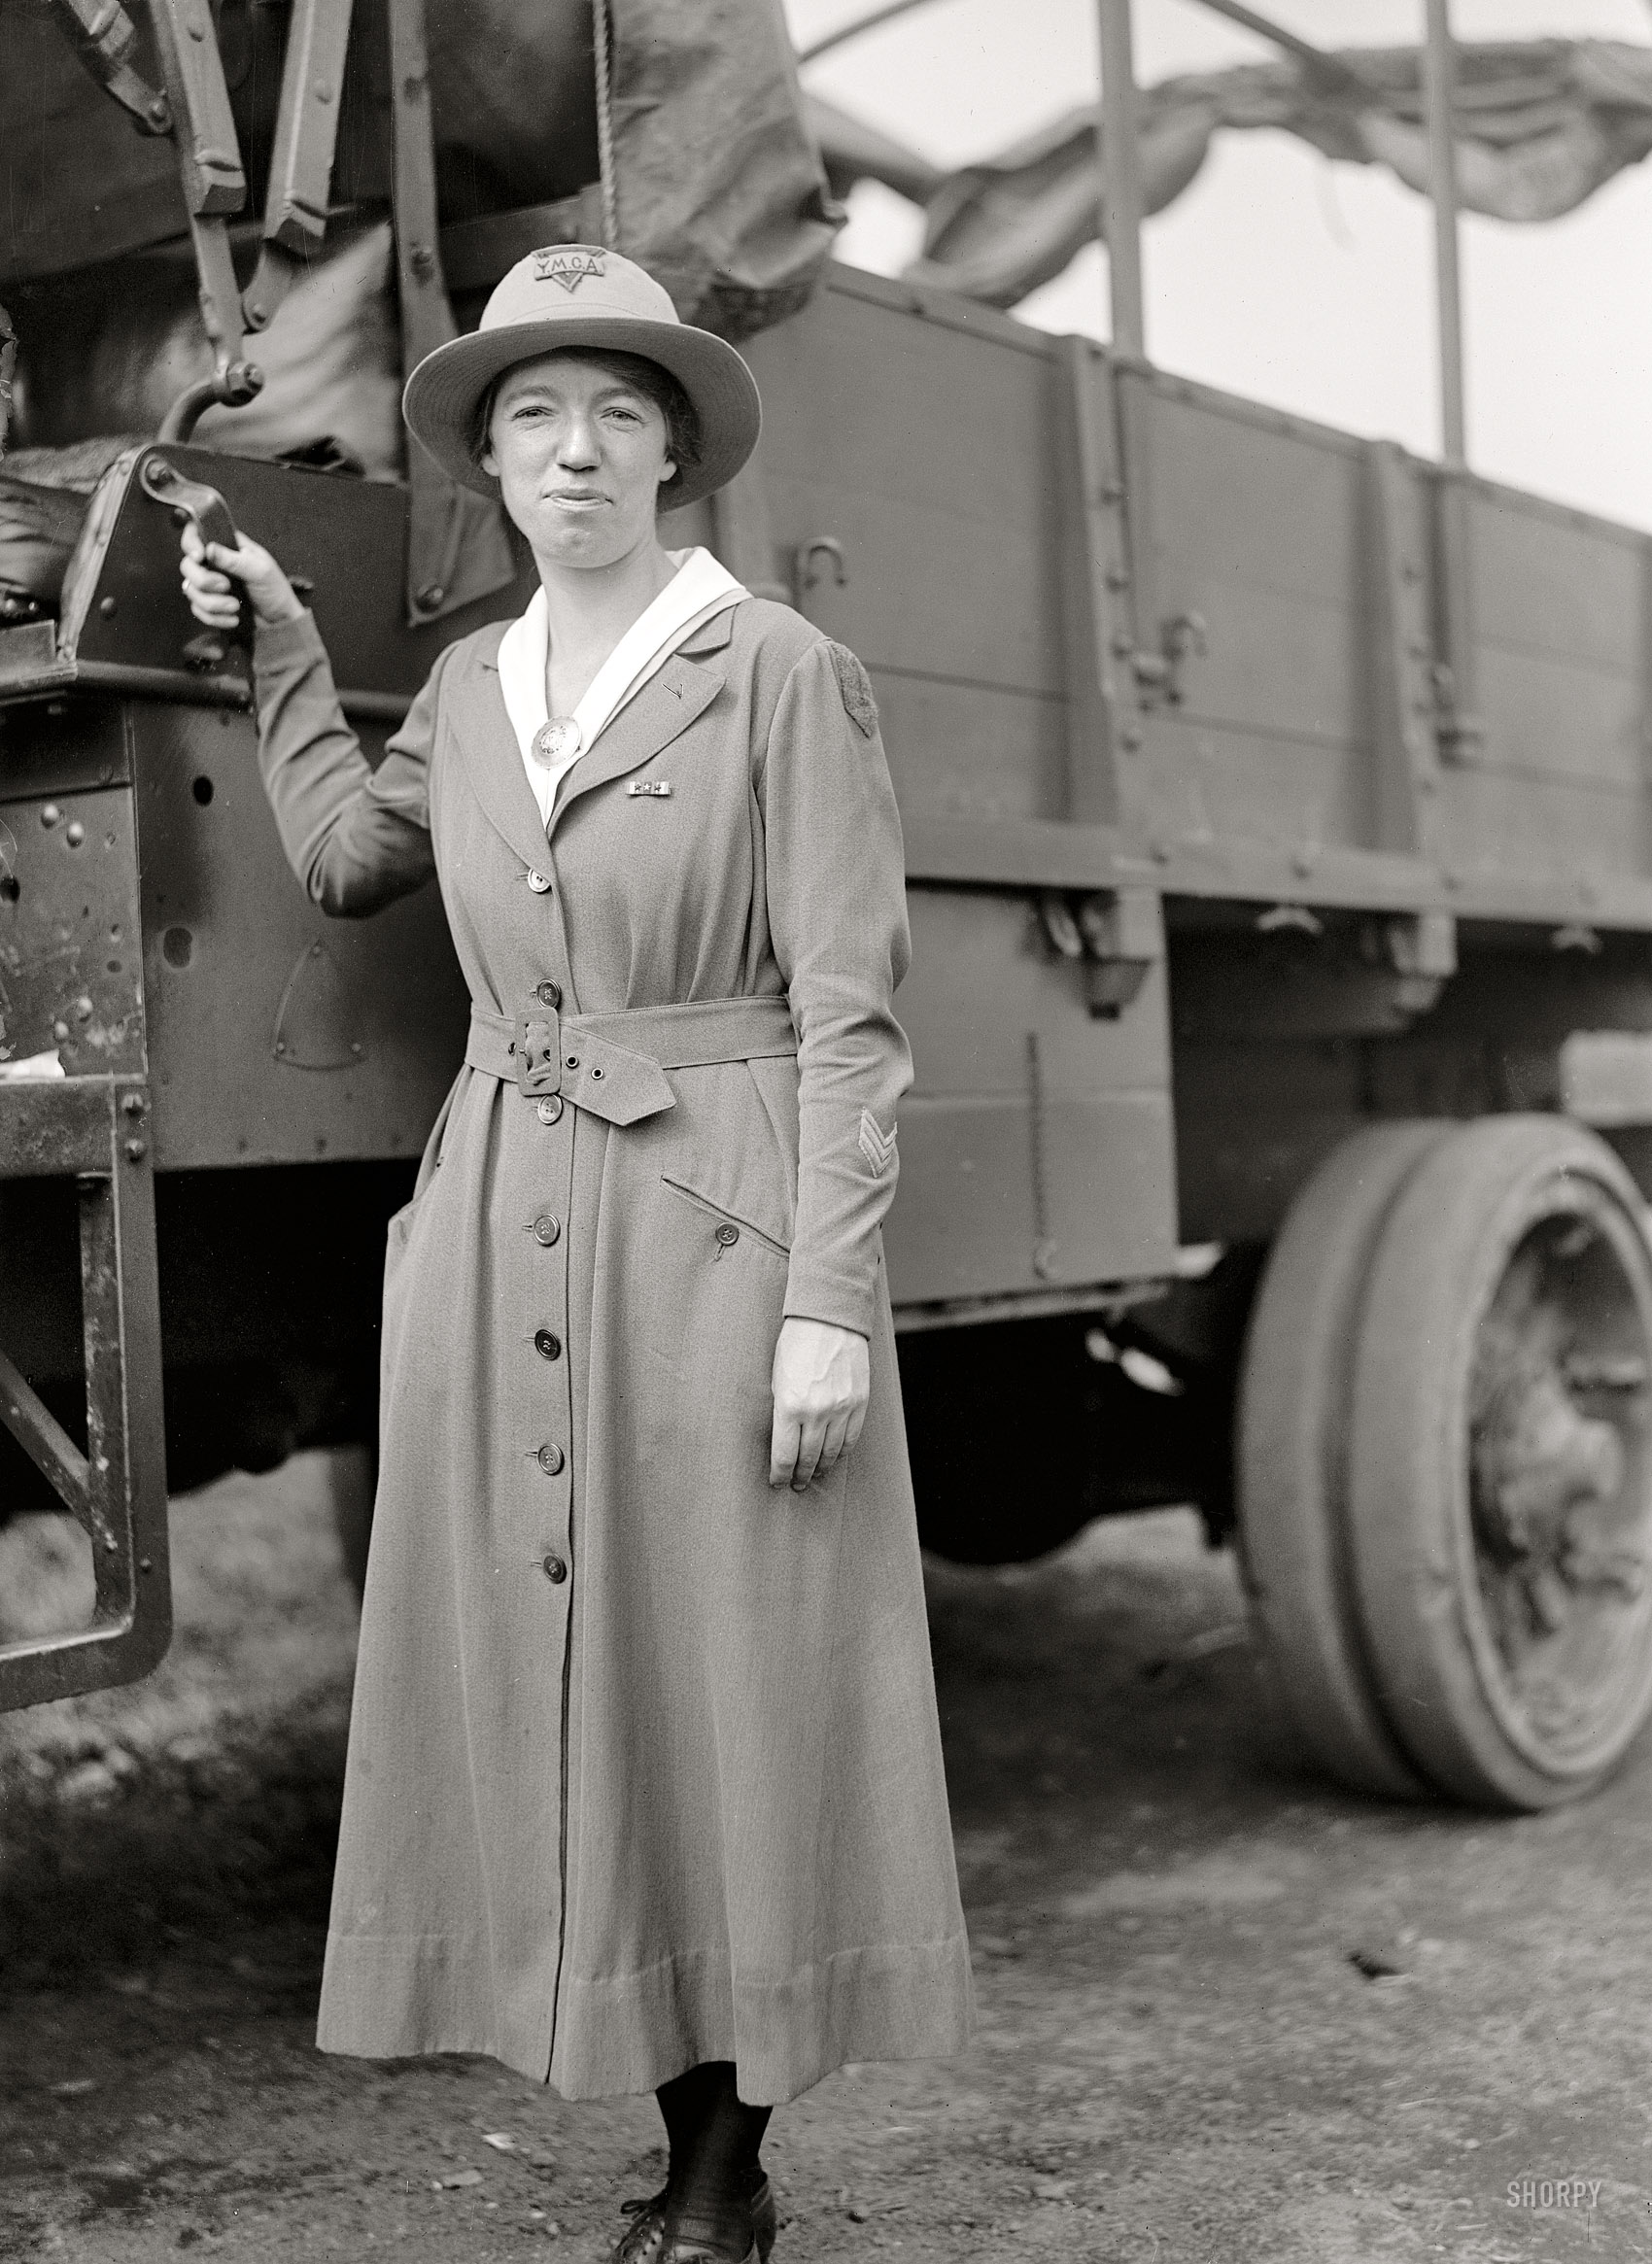 Washington, D.C., 1919. "Frances Gulick, Y.M.C.A. girl." Frances, a Y.M.C.A. welfare worker attached to the First Engineers in Europe, was awarded a citation for valor and courage during the aerial bombardment of Varmaise, France, where she operated a canteen. Harris & Ewing glass negative. View full size.